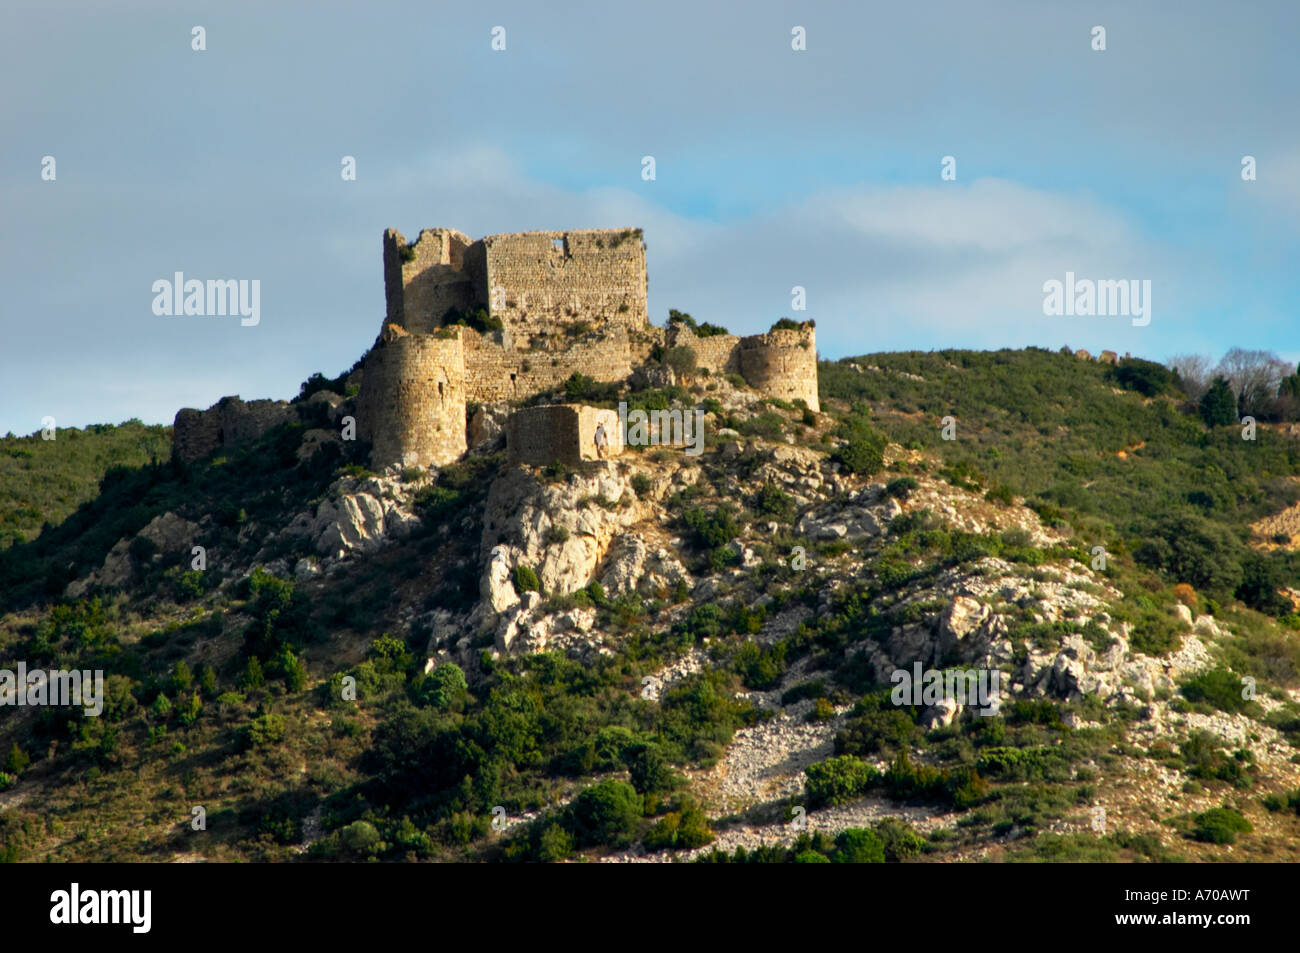 The Chateau d’Aguilar Cathar hilltop fortress dating from the 11th and 12th century on the border to Corbieres. Fitou. Languedoc. The ruins of a chateau fortress. France. Europe. Stock Photo